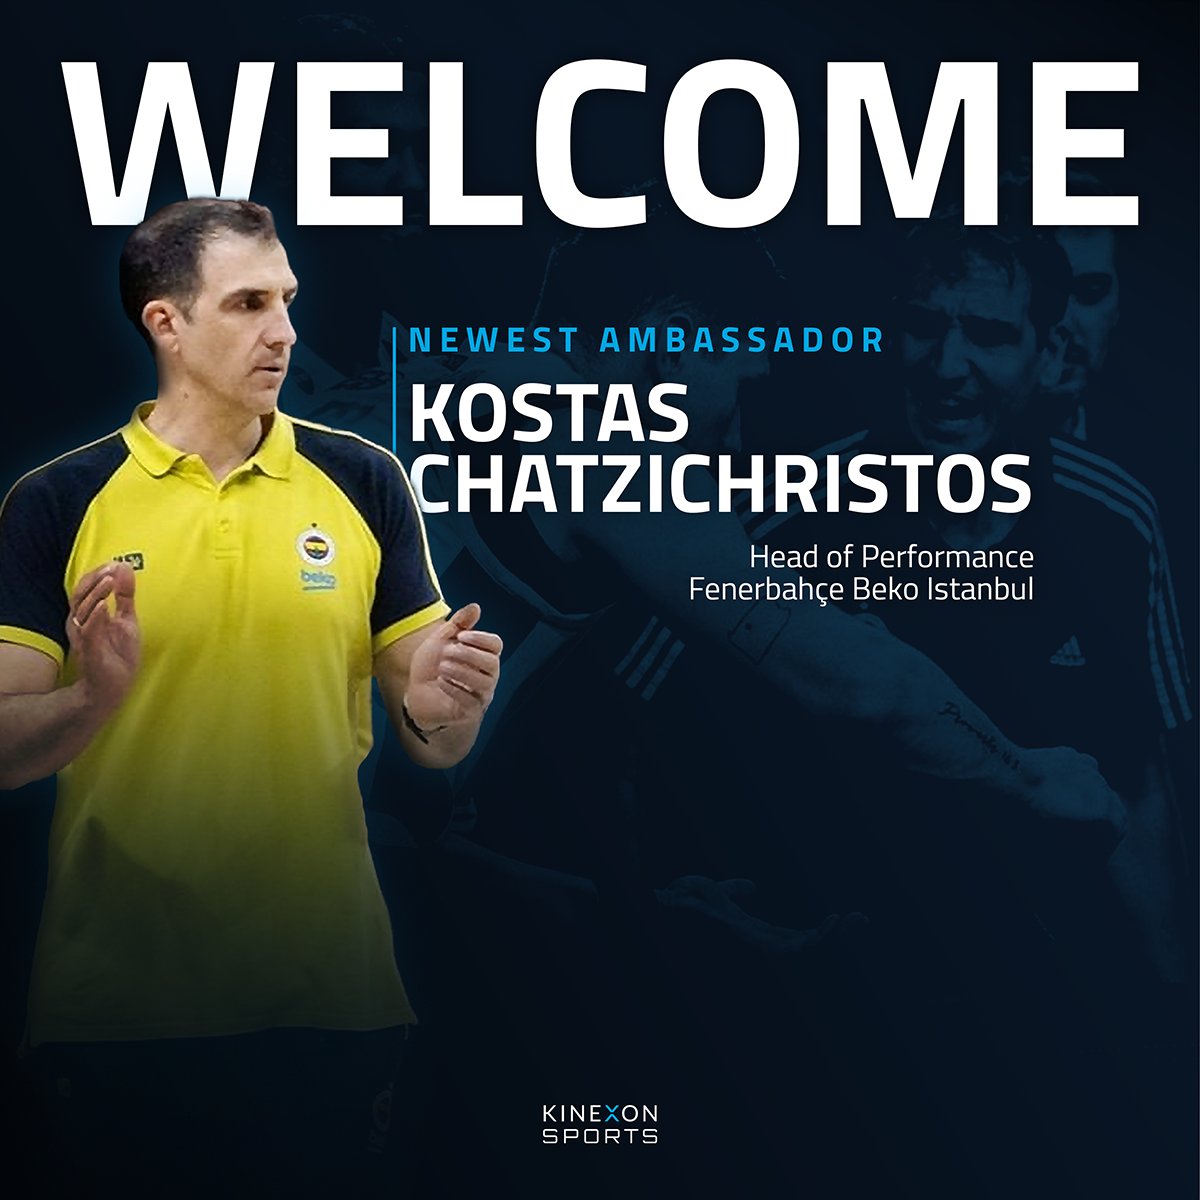 Welcome @kostaschatz! The newest ambassador at KINEXON Sports worked with teams worldwide, currently as the Head of Performance for Fenerbahçe Beko Istanbul Basketball. As co-founder of the ESCCA, Kostas knows what it takes to perform. Glad to have you onboard! #InnovateTheGame